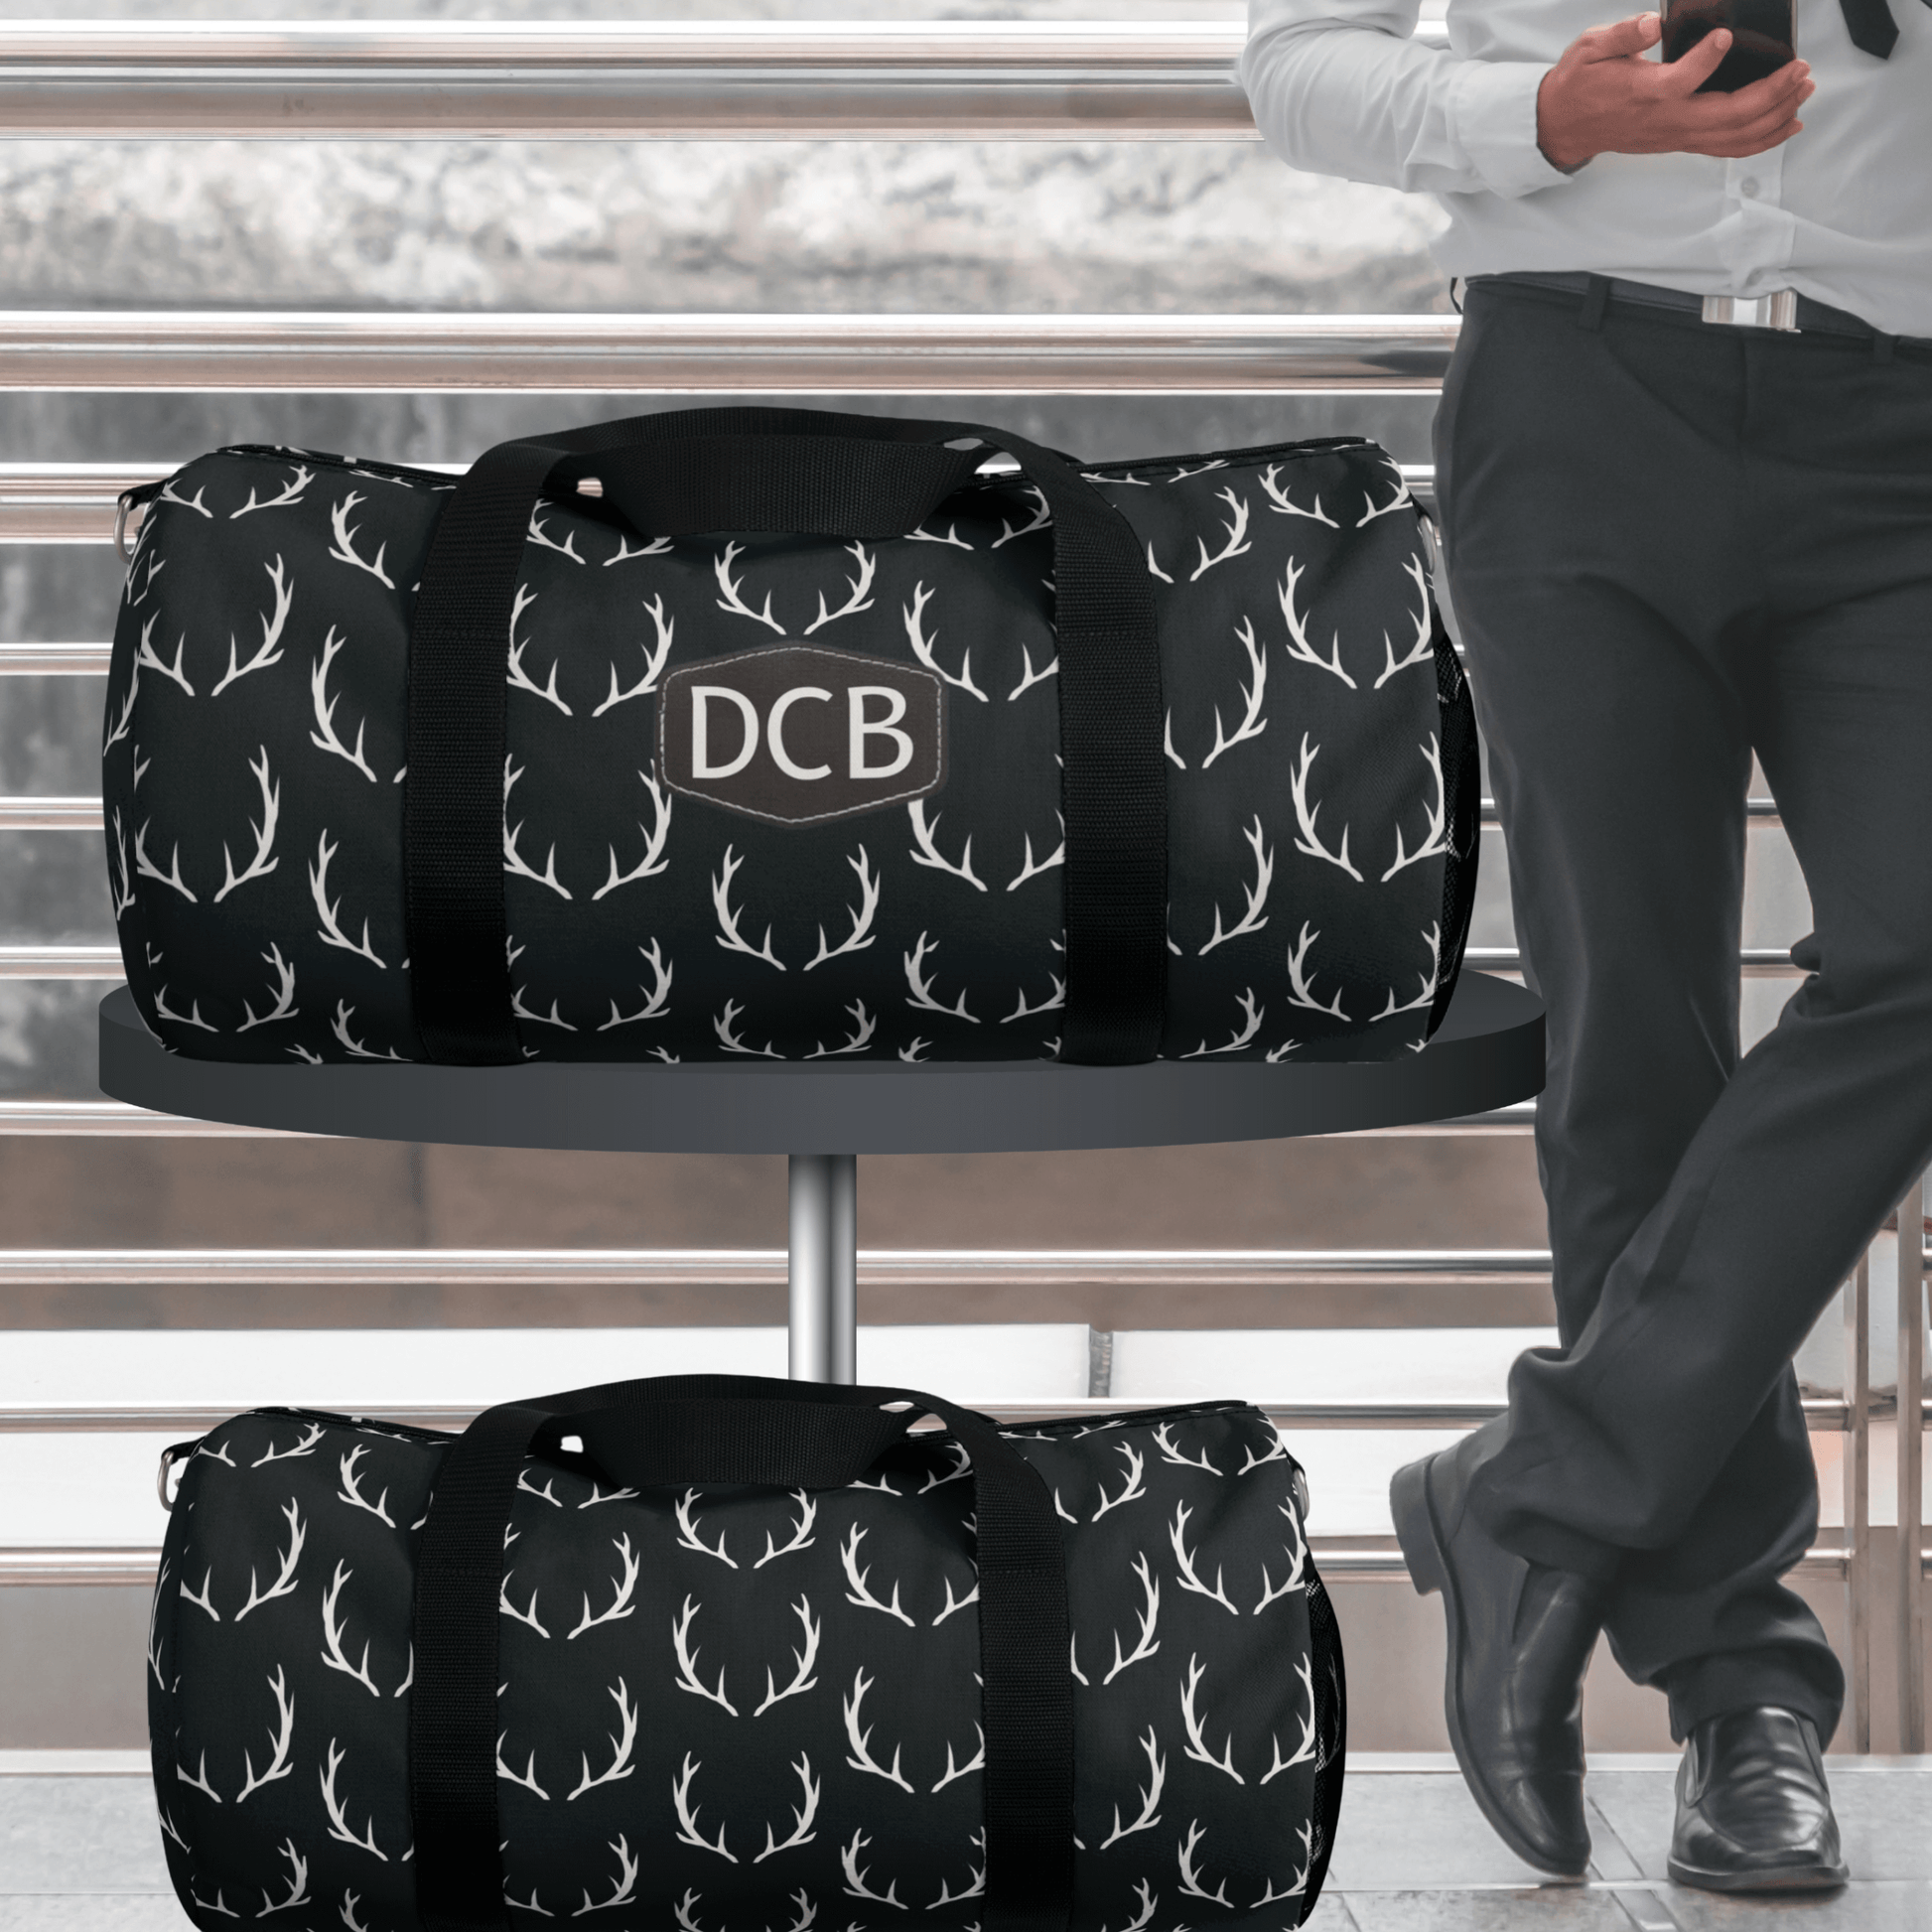 Our mens black duffel bag for deer hunters is the perfect business travel bag for him. It has a sleek design with deer antlers on a black background and the monogrammed patch is brown. 